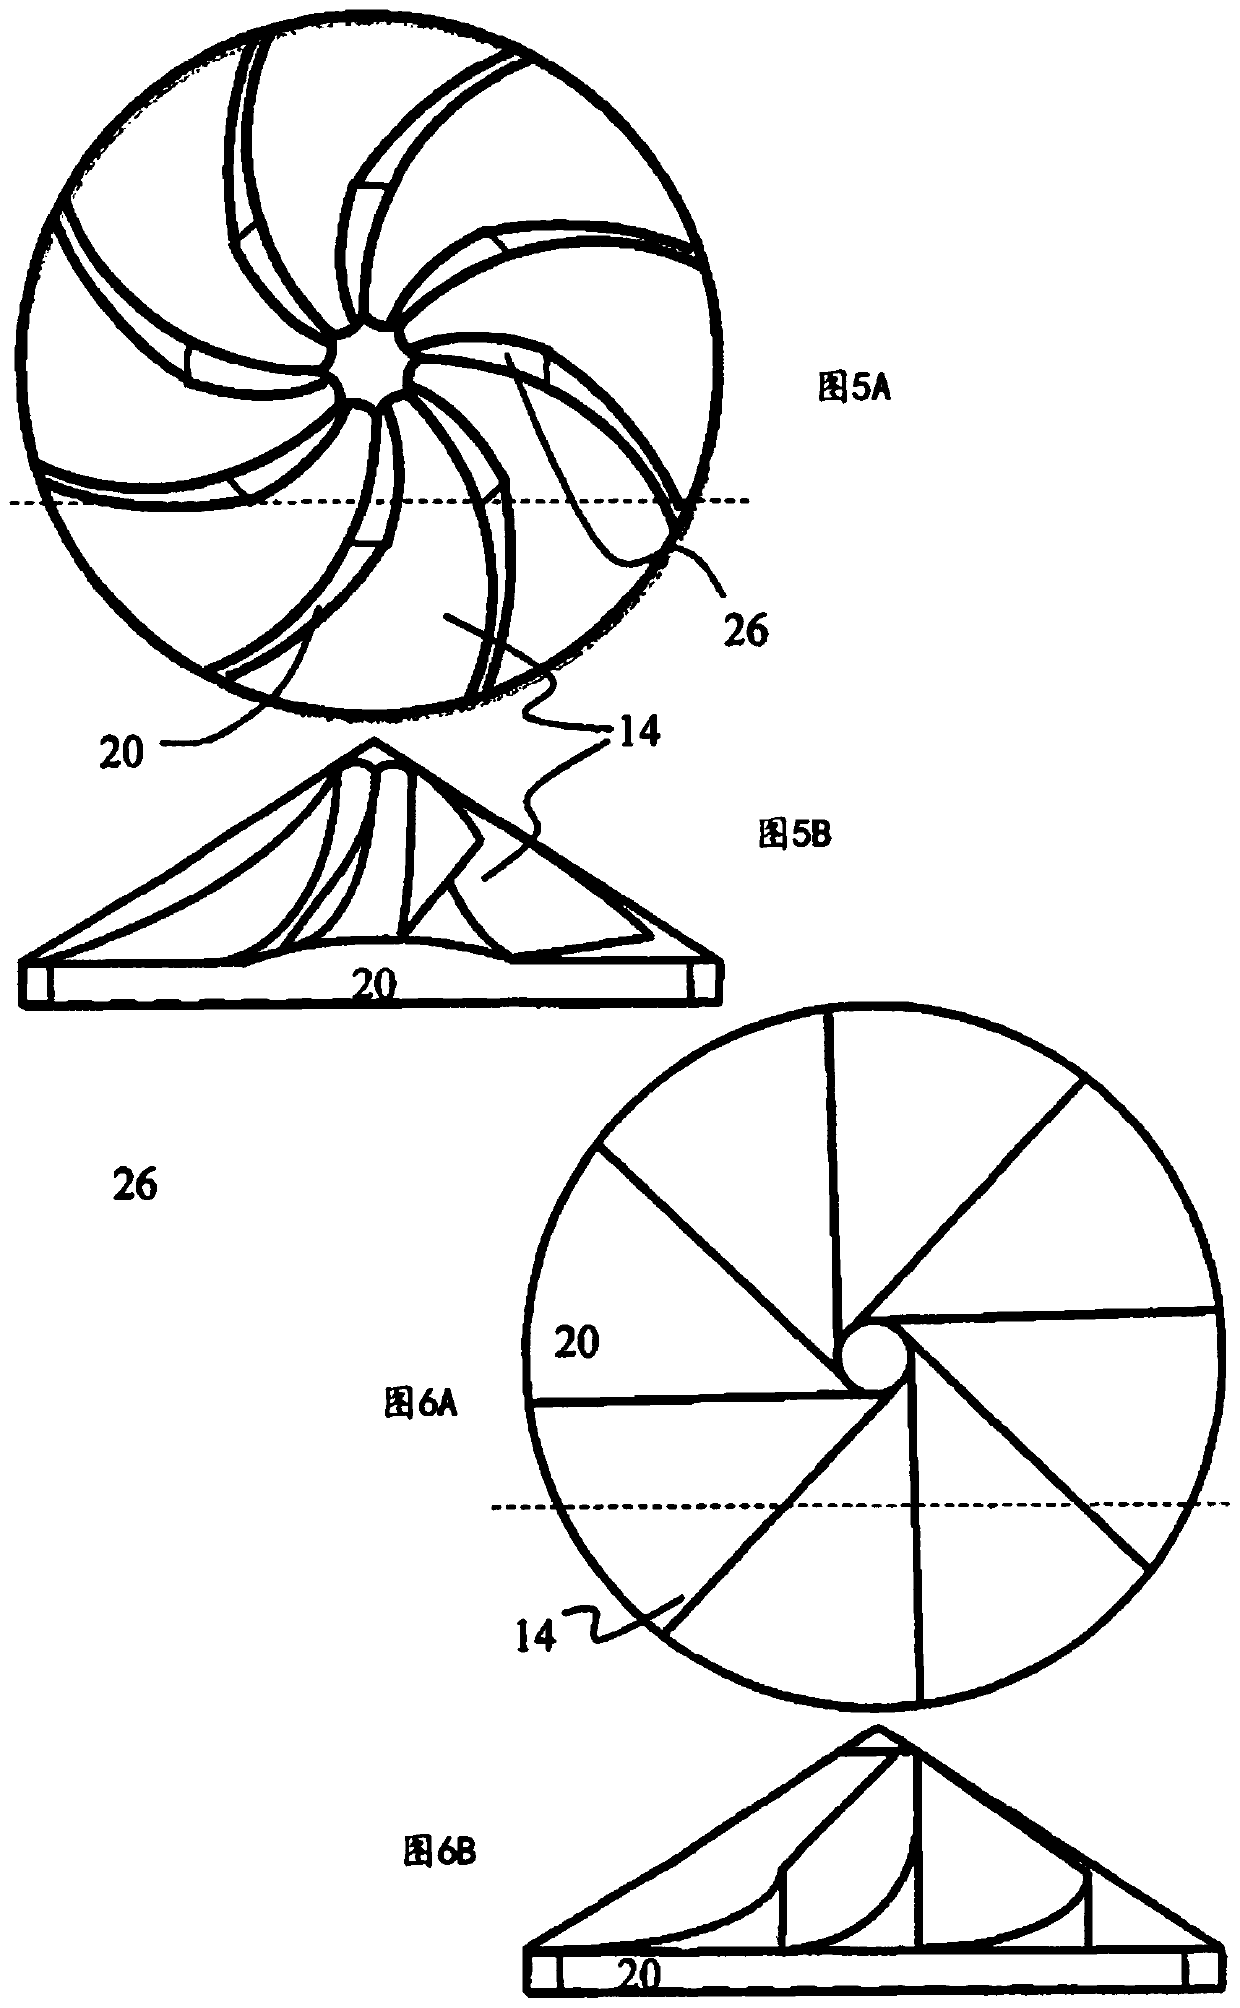 Valve with guide vanes for coolant for internal combustion engines